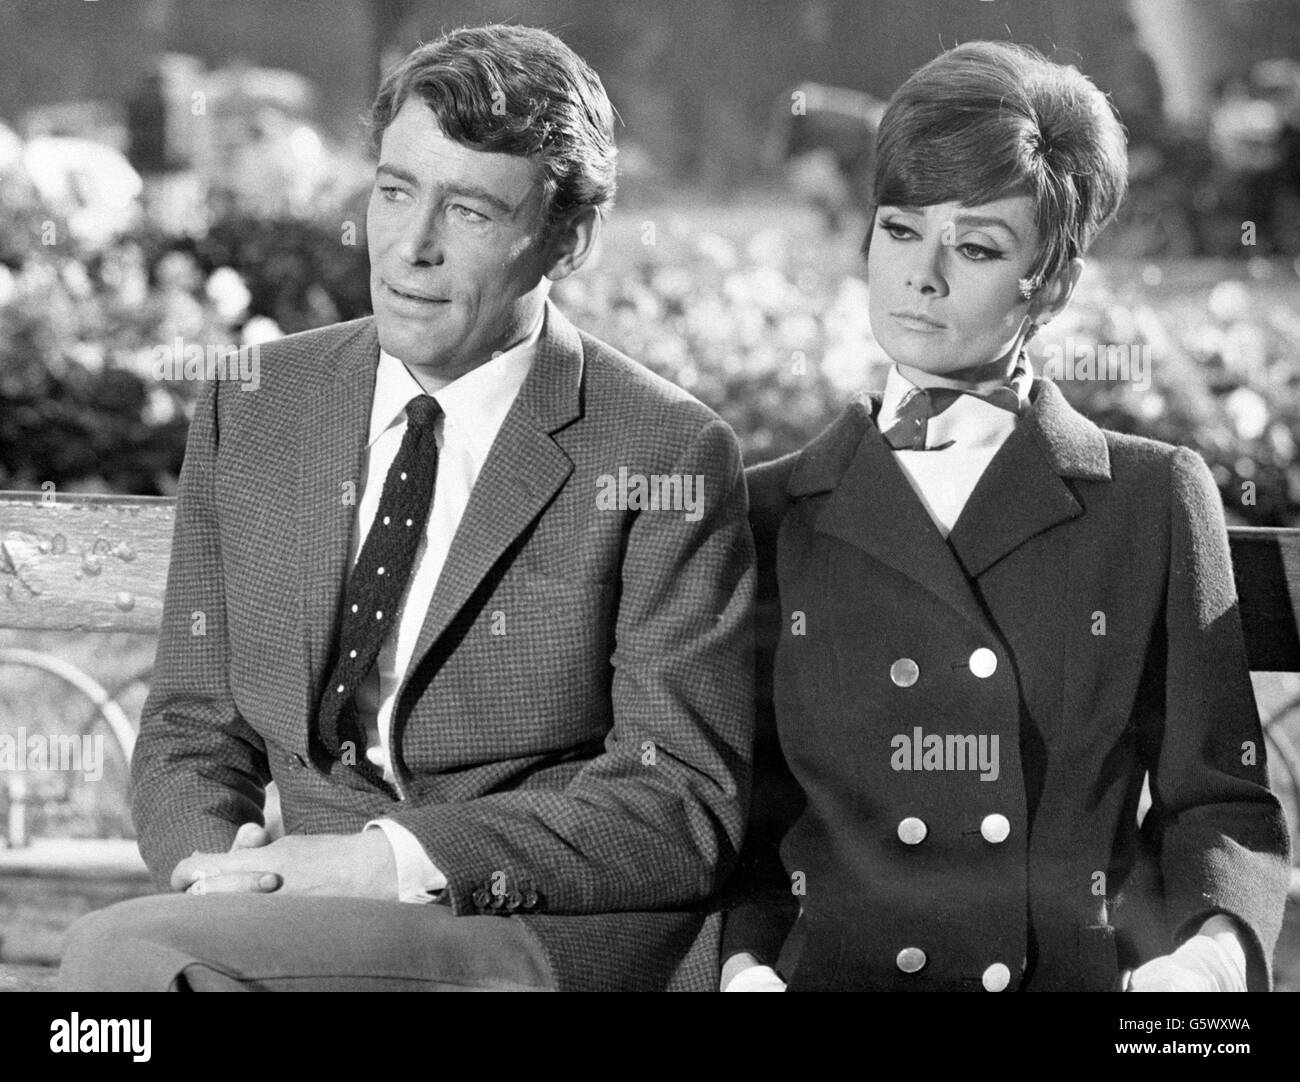 Entertainment - Film - 'How to Steal a Million Dollars and Live Happily Ever After' - Audrey Hepburn and Peter O'Toole Stock Photo